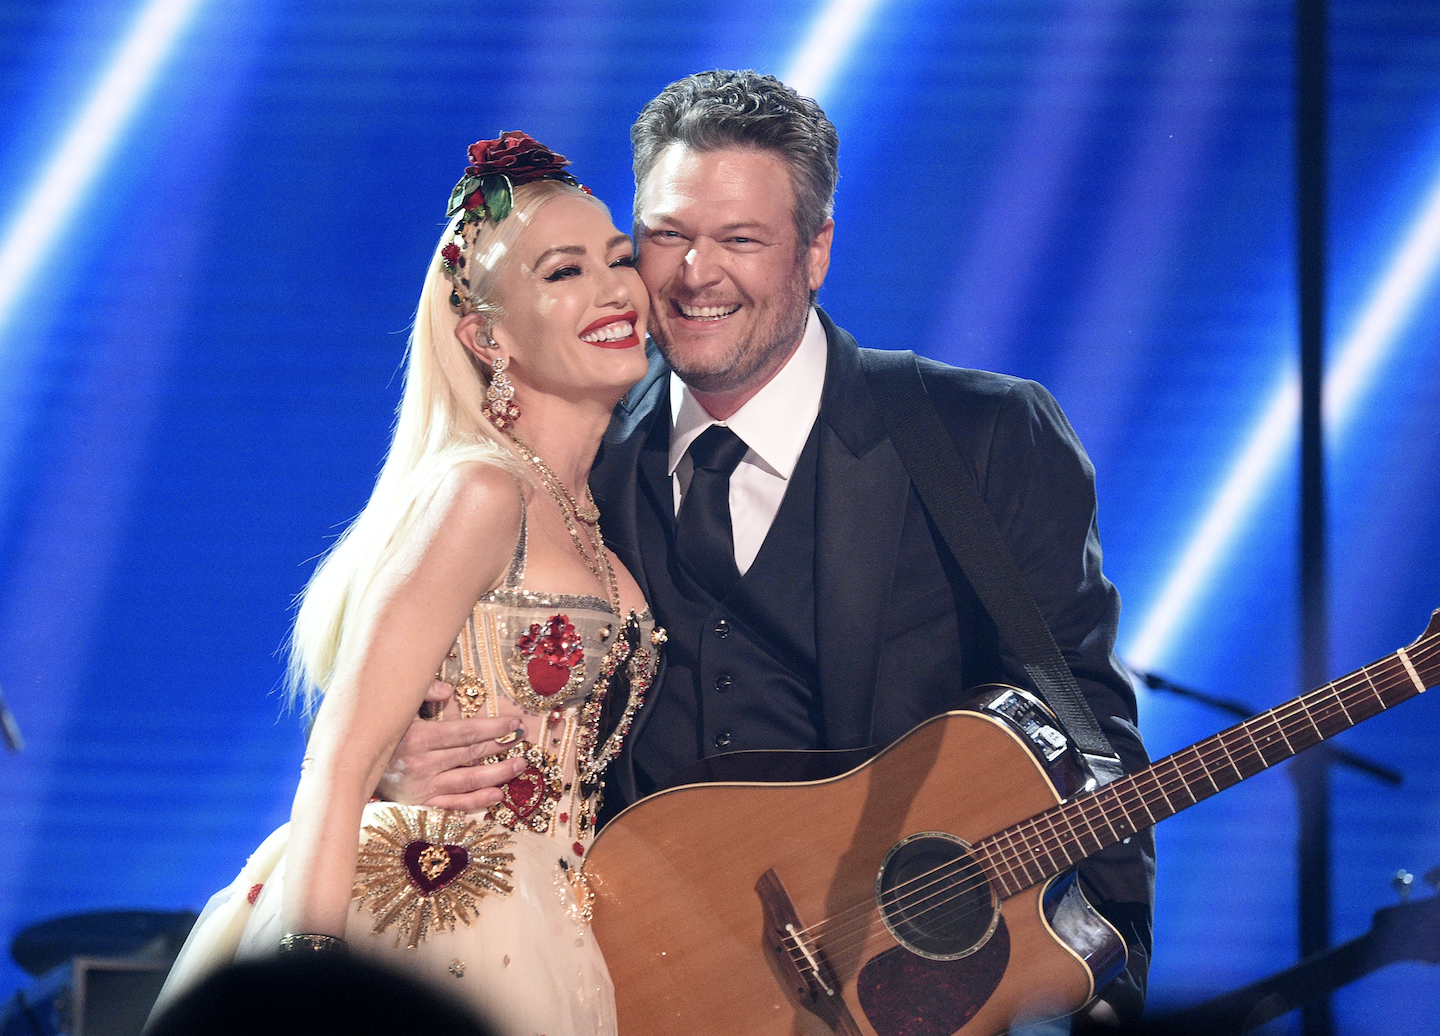 Gwen Stefani and Blake Shelton pose onstage during the 62nd Annual GRAMMY Awards at STAPLES Center on January 26, 2020 in Los Angeles, California